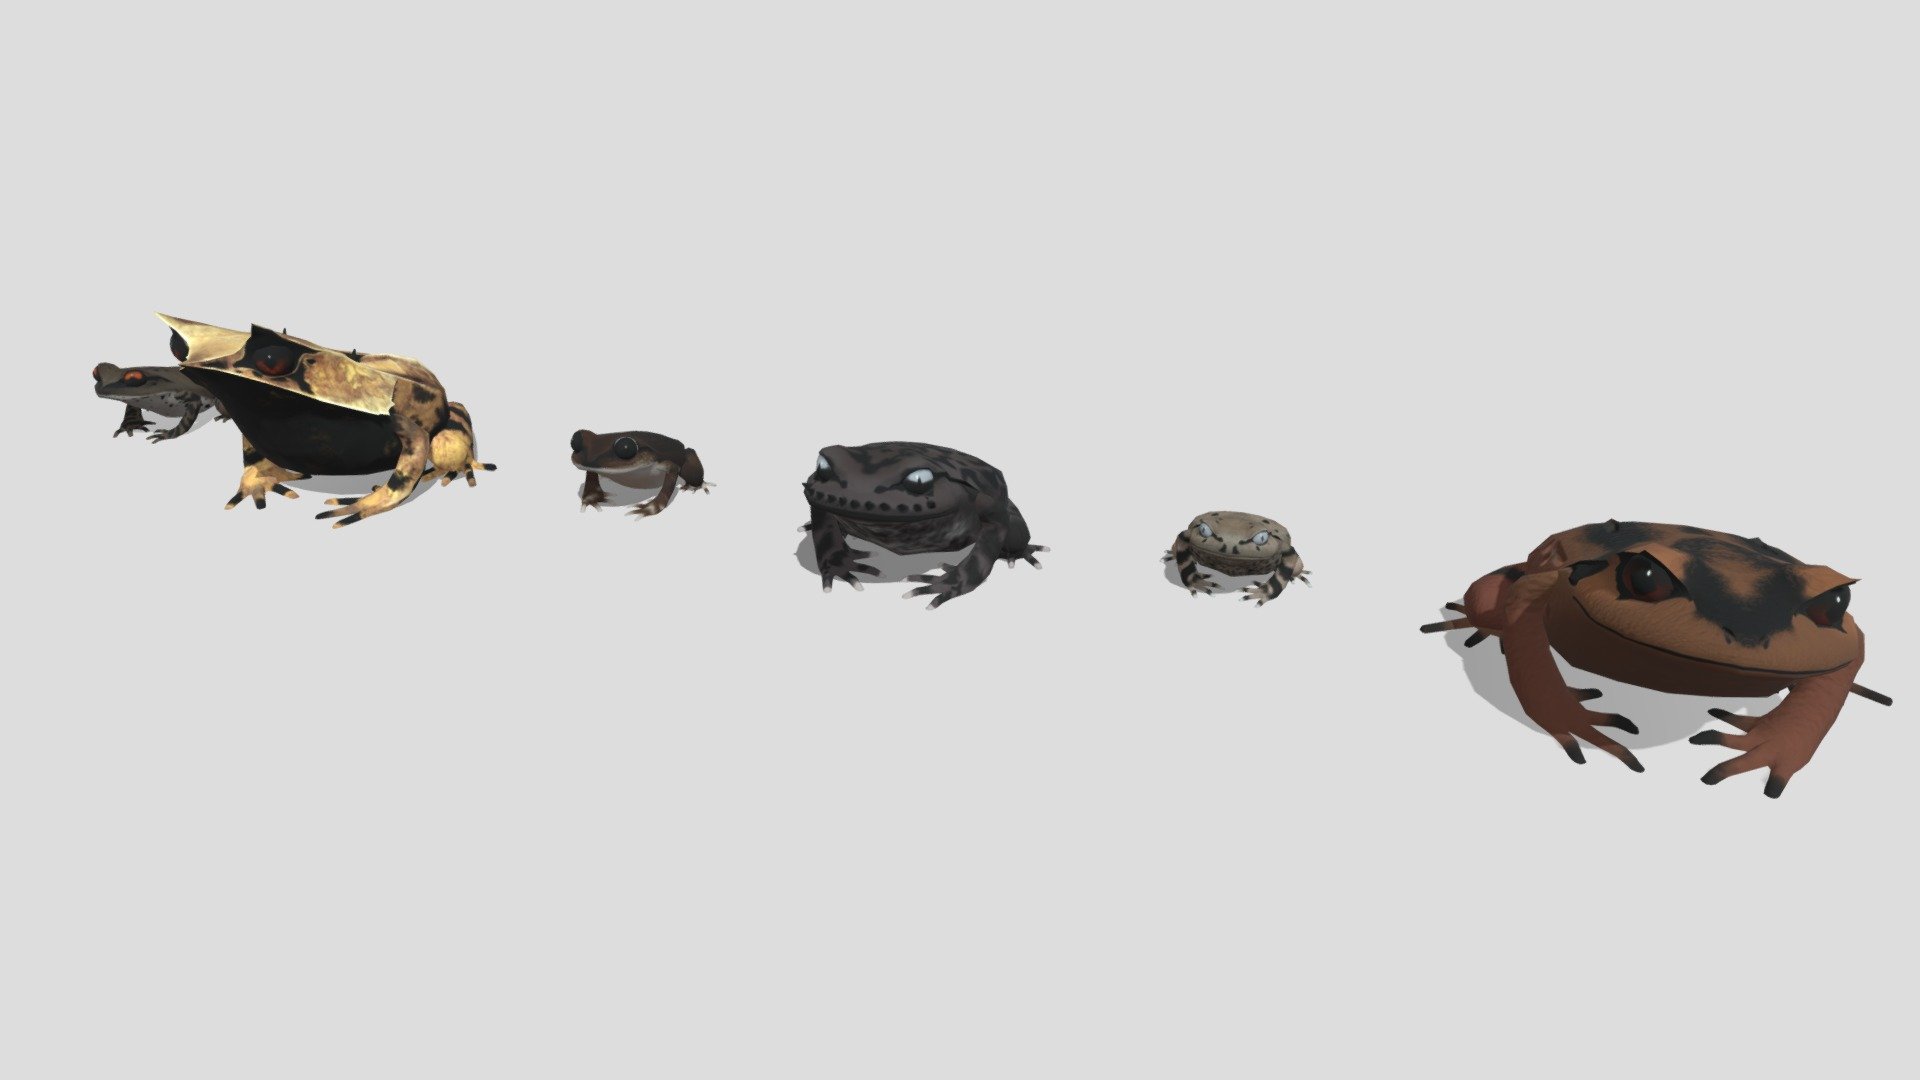 They are 6 kinds of tree frogs(from the Hylidae family).




和 ベトナムフトコノハガエル / 英 Annam Broad-headed Toard / 学 Brachytarsophrys intermedia

和ボンプウデナガガエル / 英 Bompu litter frog / 学 Leptobrachium bompu

和ガビシャンヒゲガエル / 英 Emei moustache toad / 学 Leptobrachium boringii

和キナバルウデナガガエル / 英 Asian litter frog / 学 Leptobrachium gunungense

和ミツヅノコノハガエル / 英 Long-nosed horned frog / 学 Megophrys nasuta

和ヘンドリクソンウデナガガエル / 英 Spotted Litter Frog / 学 Leptobrachium hendricksoni
 - 6 kinds of tree frog（Hylidae family） - 3D model by Mozukui (@redfrogman) 3d model